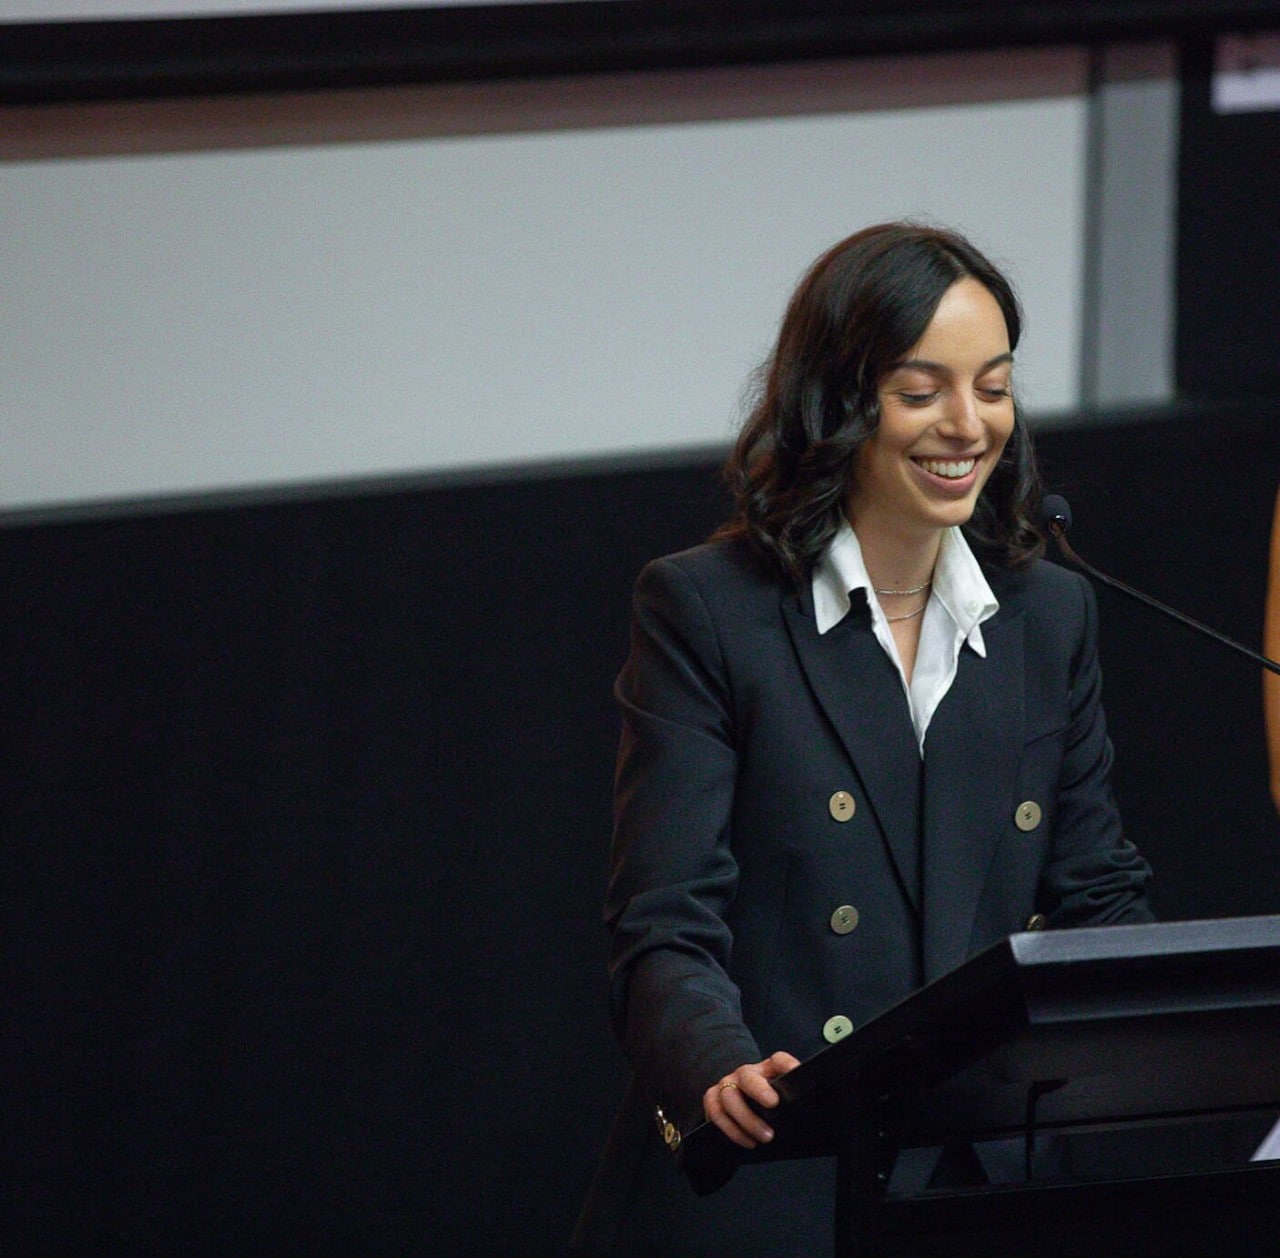 Olivia Morris wearing a black jacket and standing in front of a lecturn to give a speech